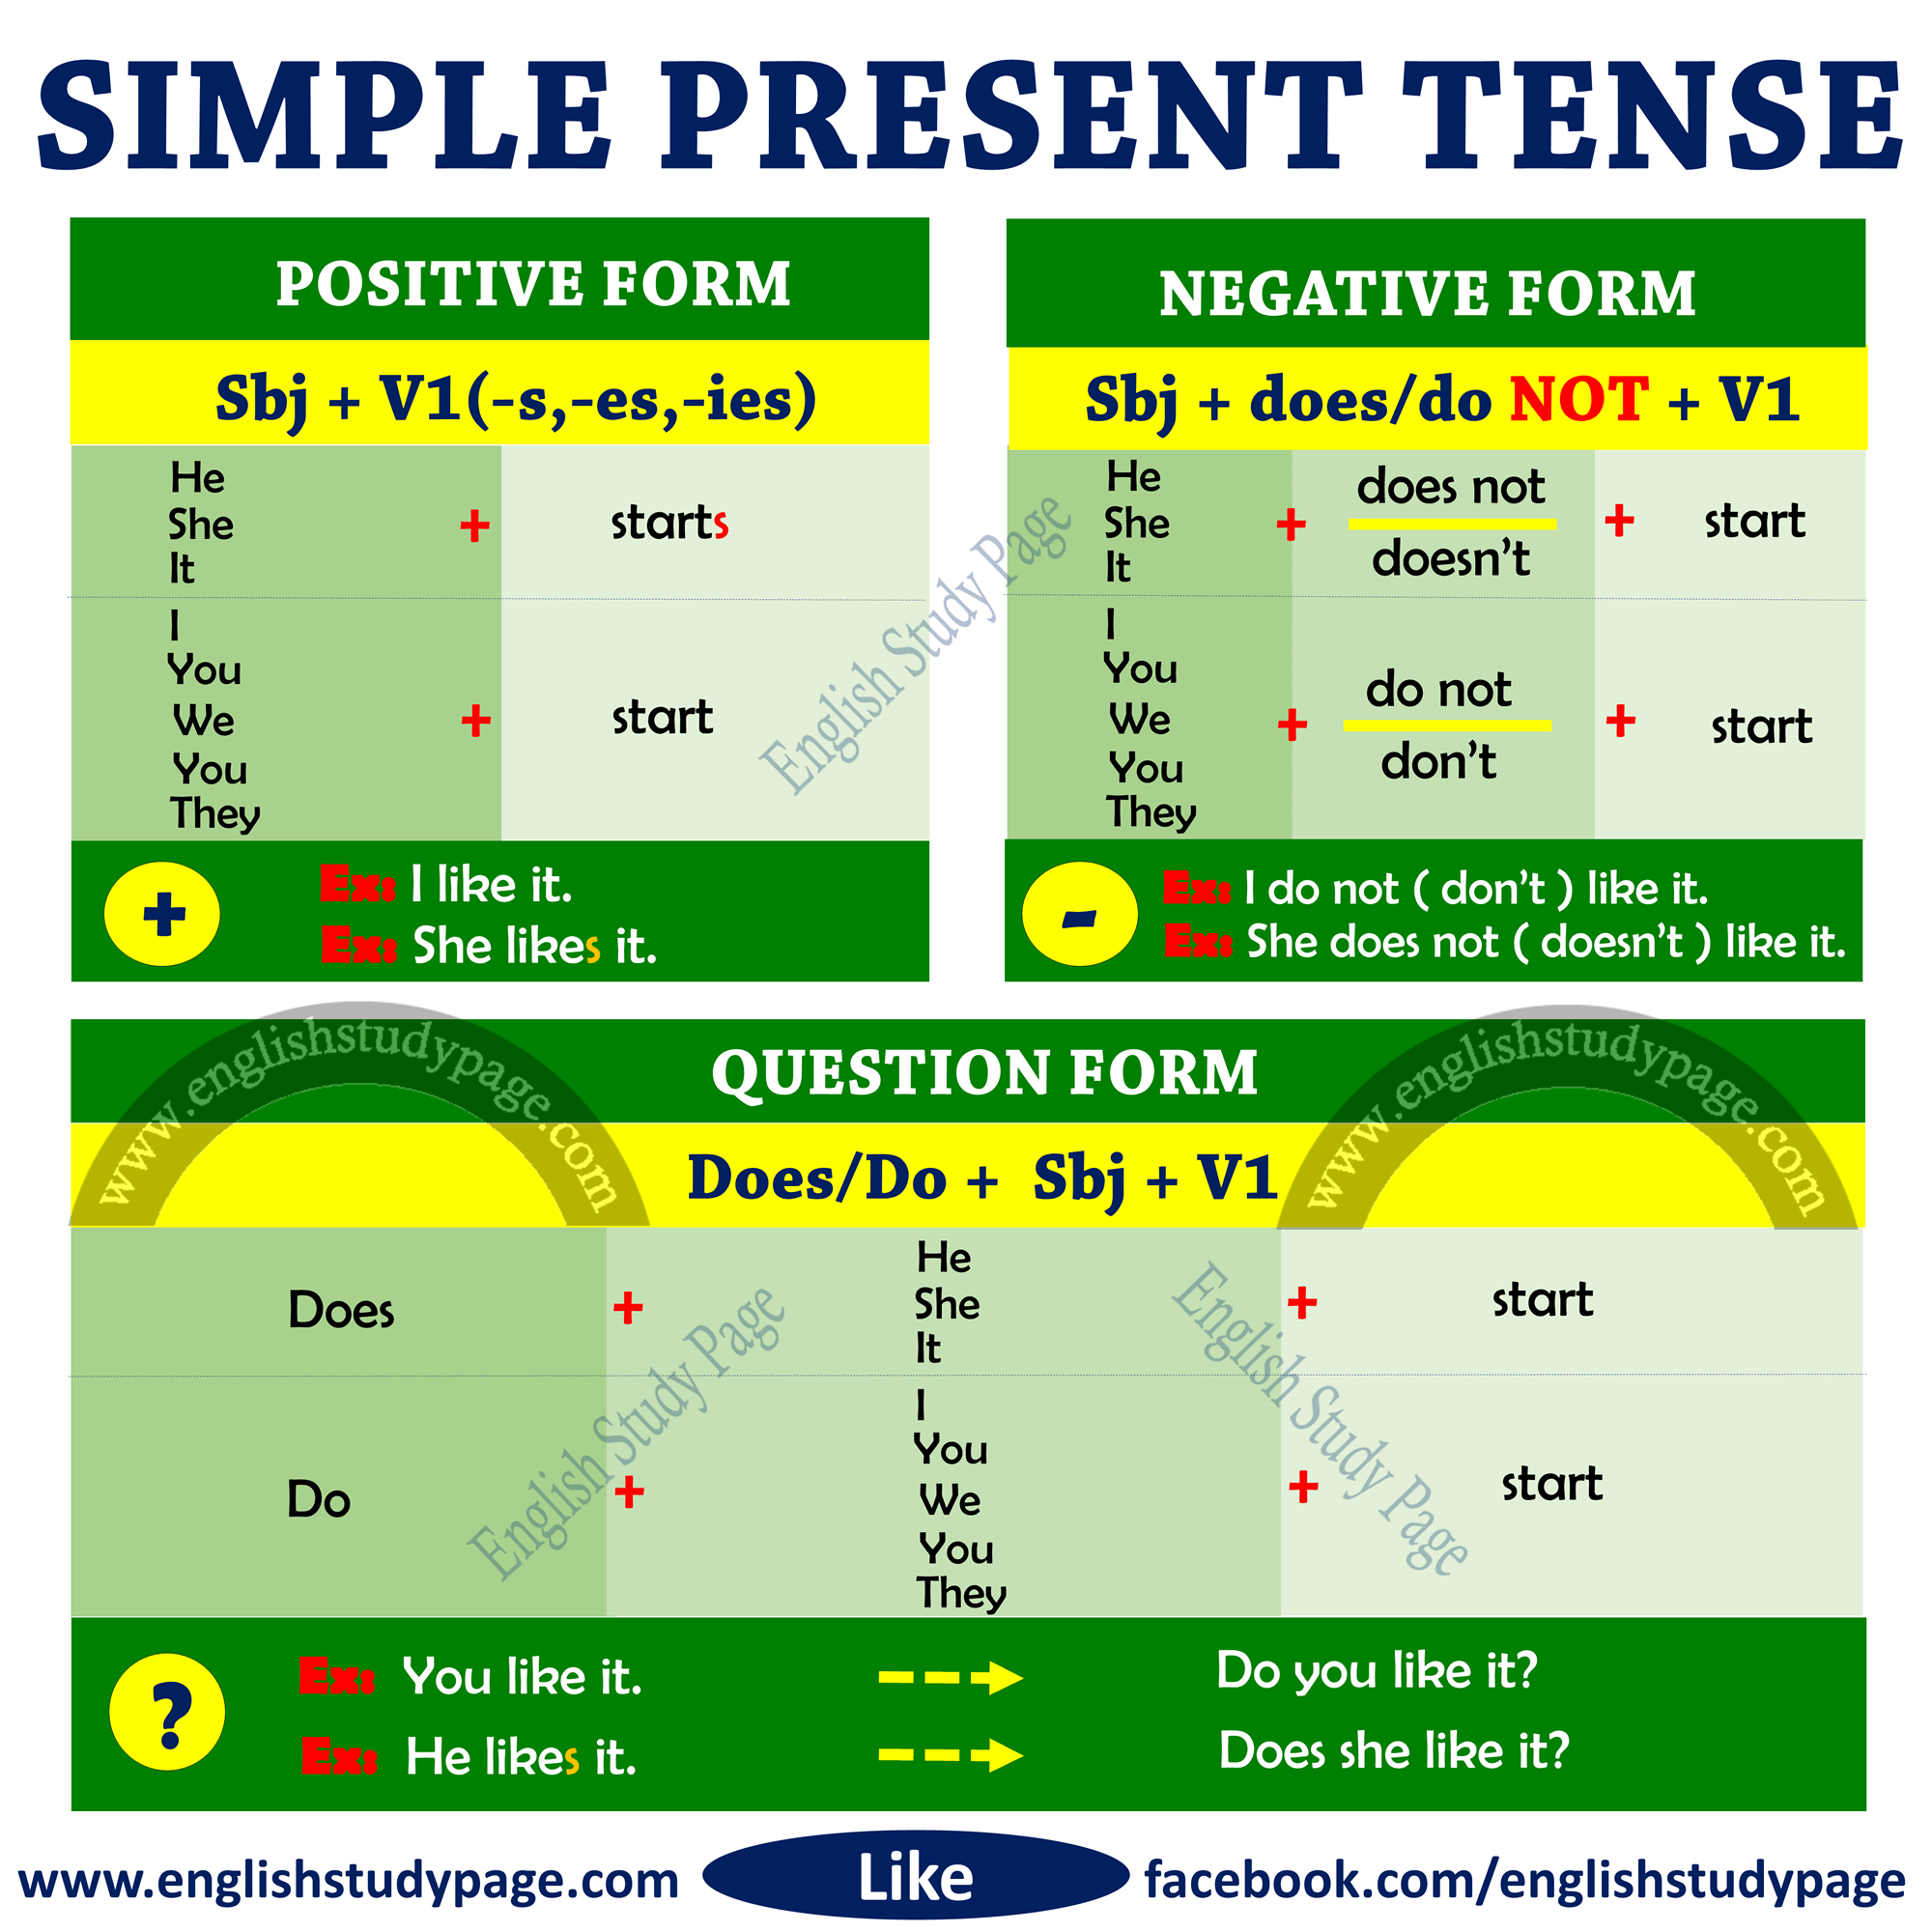 Structure of Simple Present Tense - English Study Page